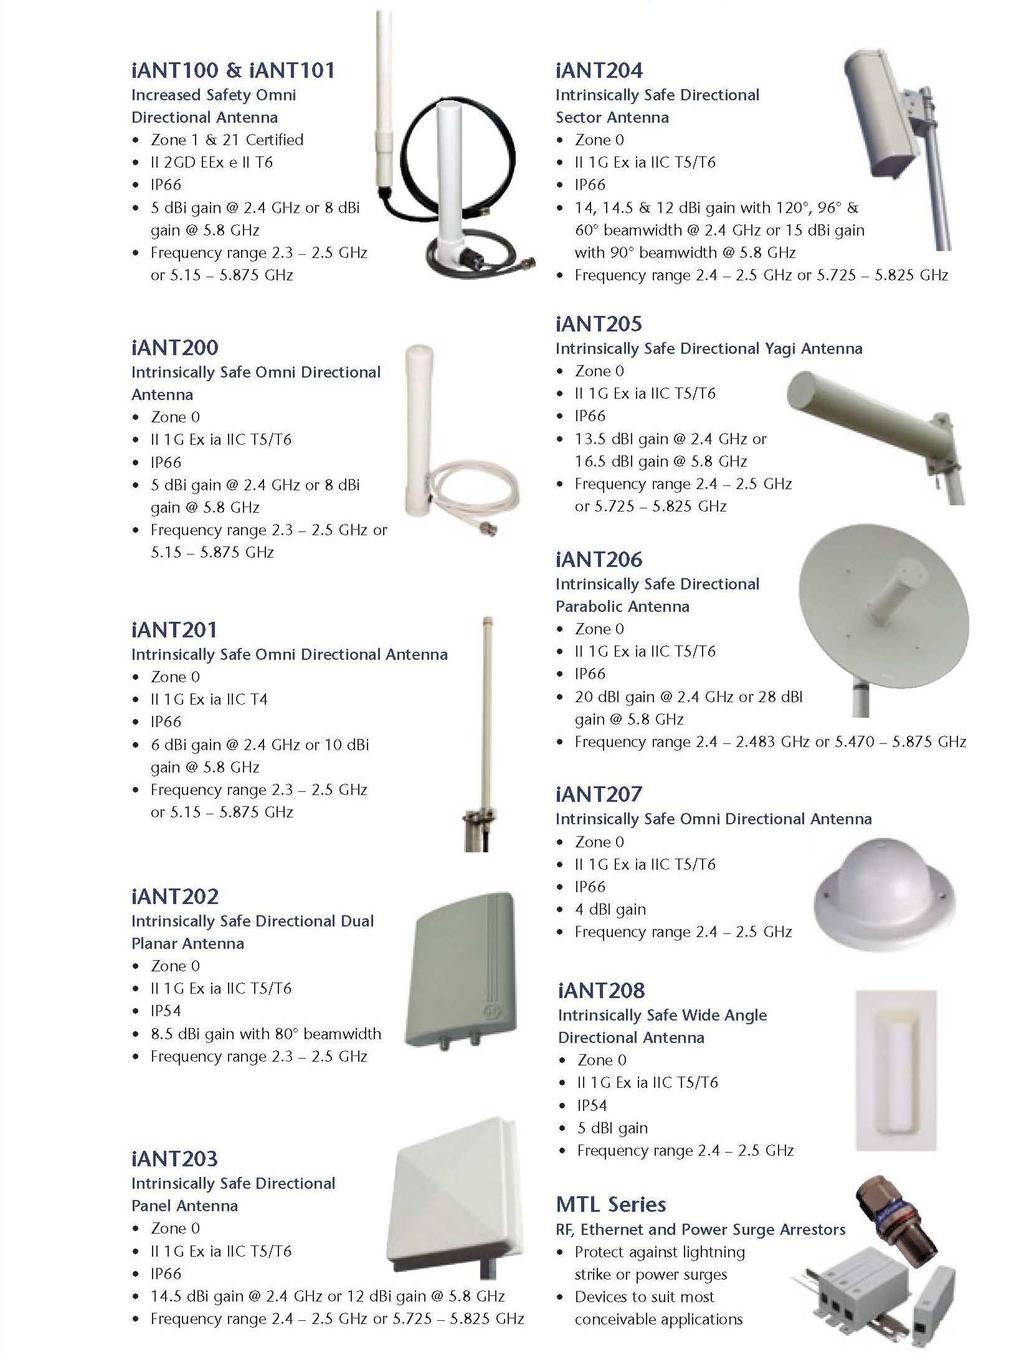 II 2 GD EEx e II T6-40 C to 60 C IP66 Overview The iant100 is an increased safety antenna and has been designed and ATEX approved for use in Zone 1 / 21 & Zone 2/22 Hazardous Area Environments.